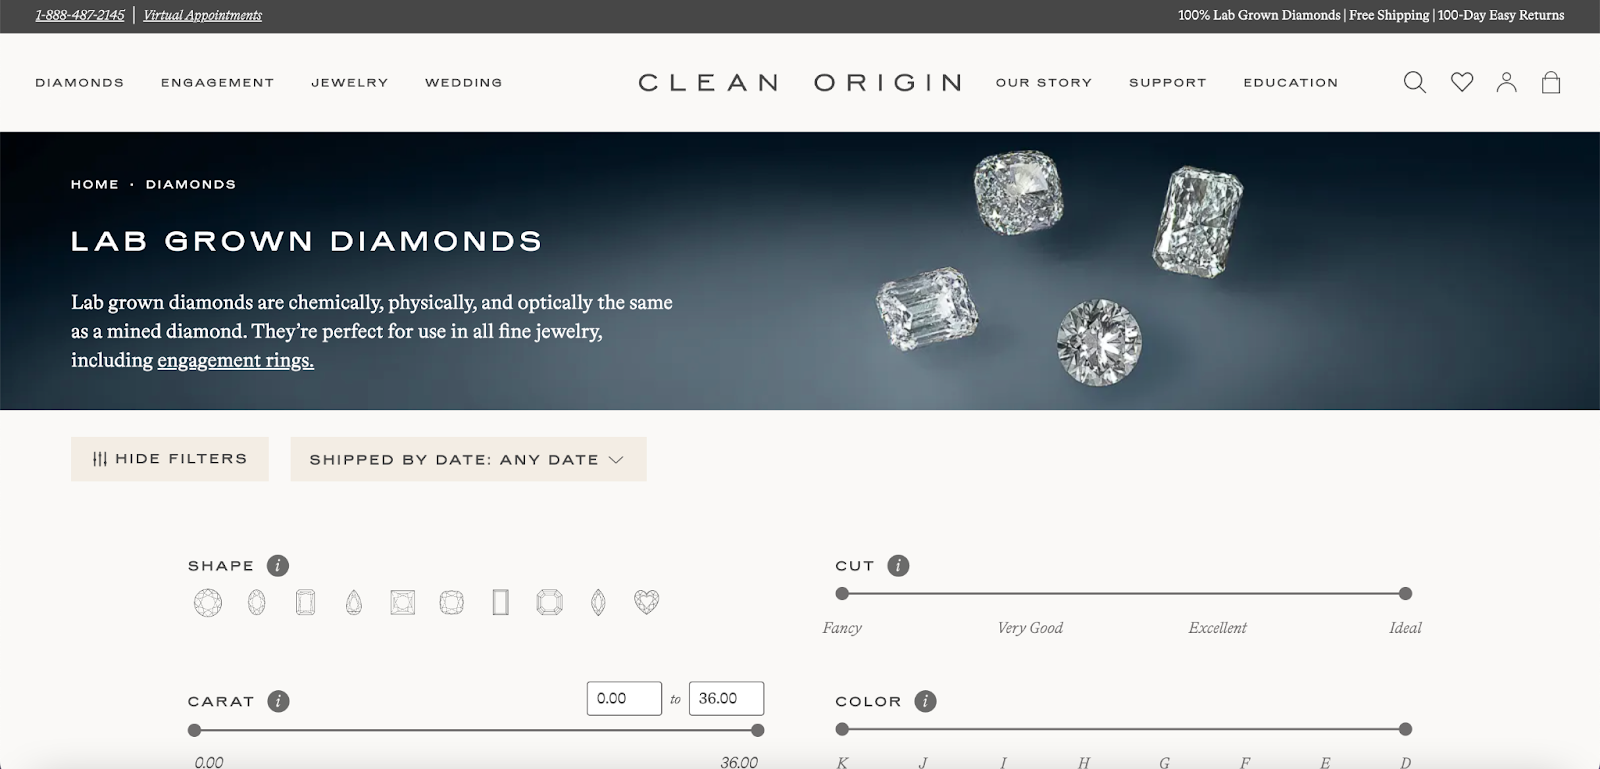 It is the landing page for clean origin where they showcase ways for sustainably sourcing lab grown diamonds.